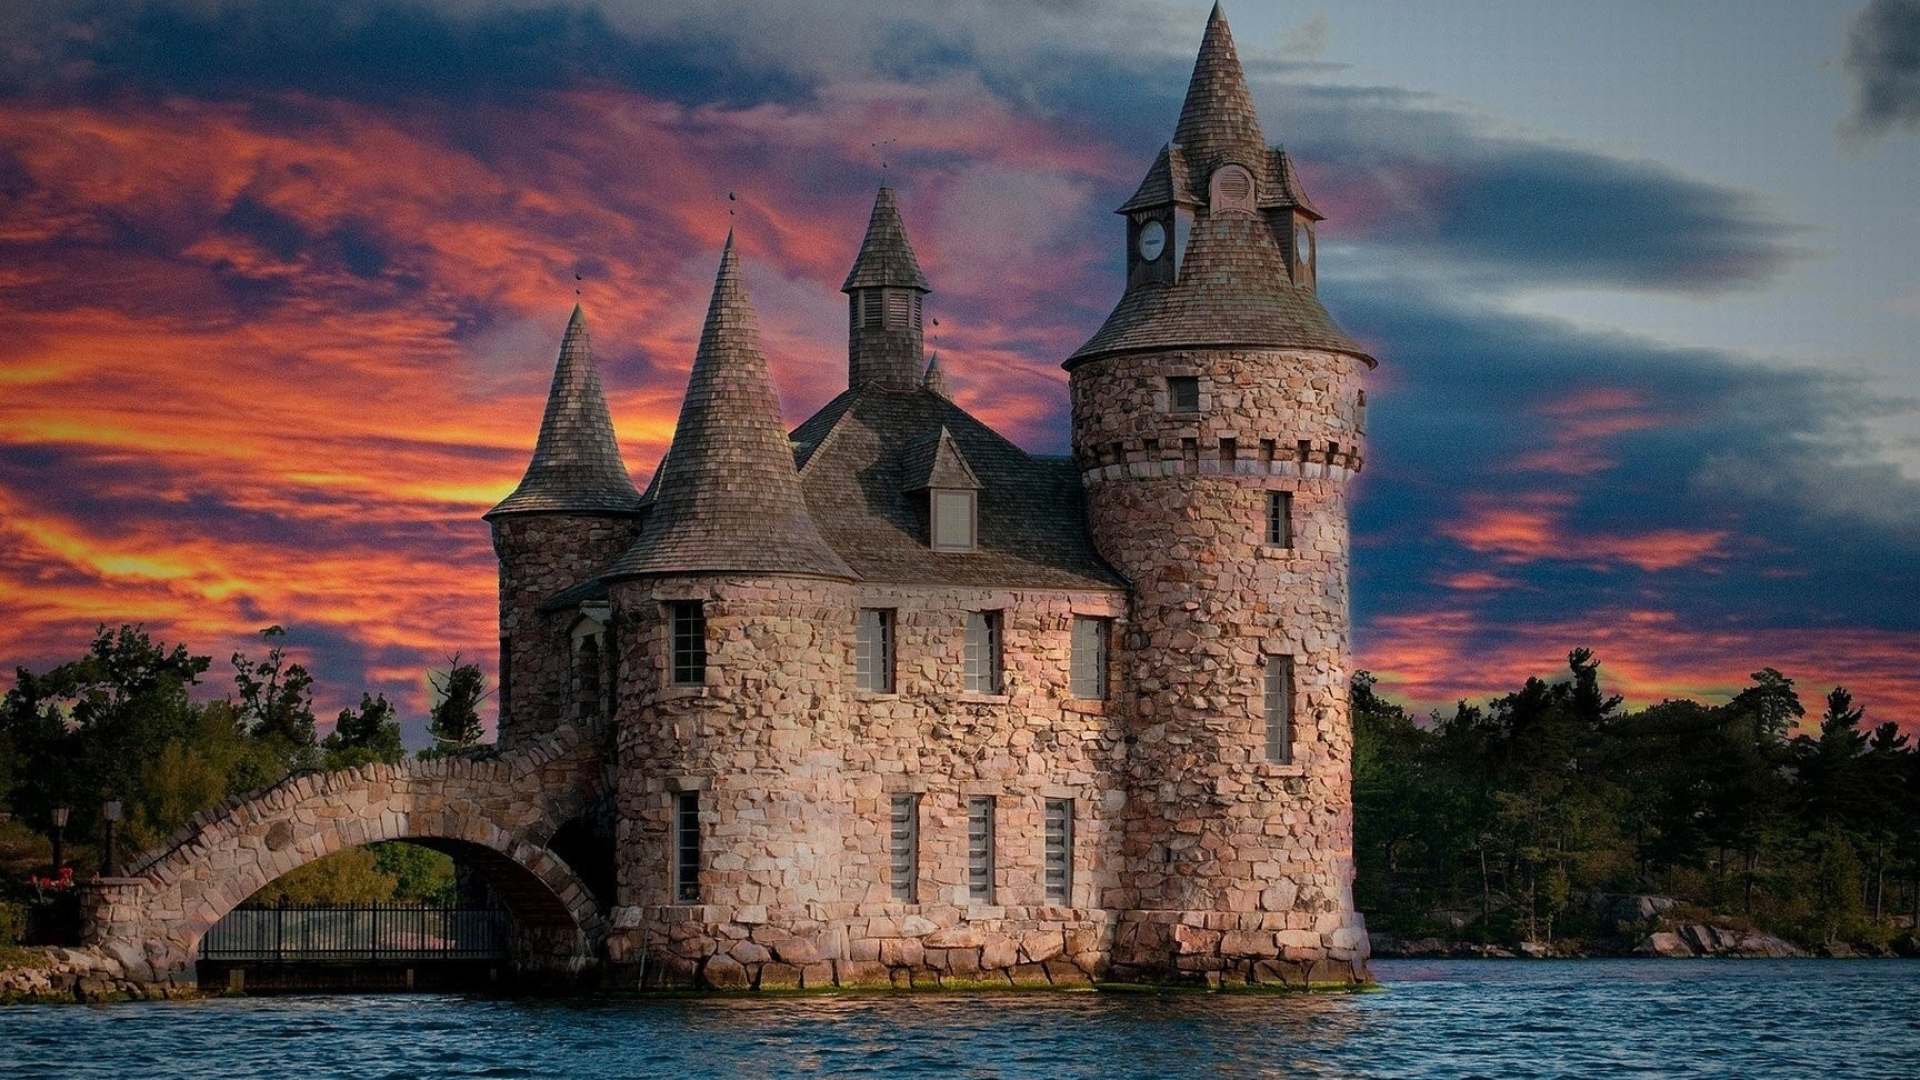 Castle: A major landmark and tourist attraction in the Thousand Islands region of the U.S. state of New York, Boldt. 1920x1080 Full HD Background.